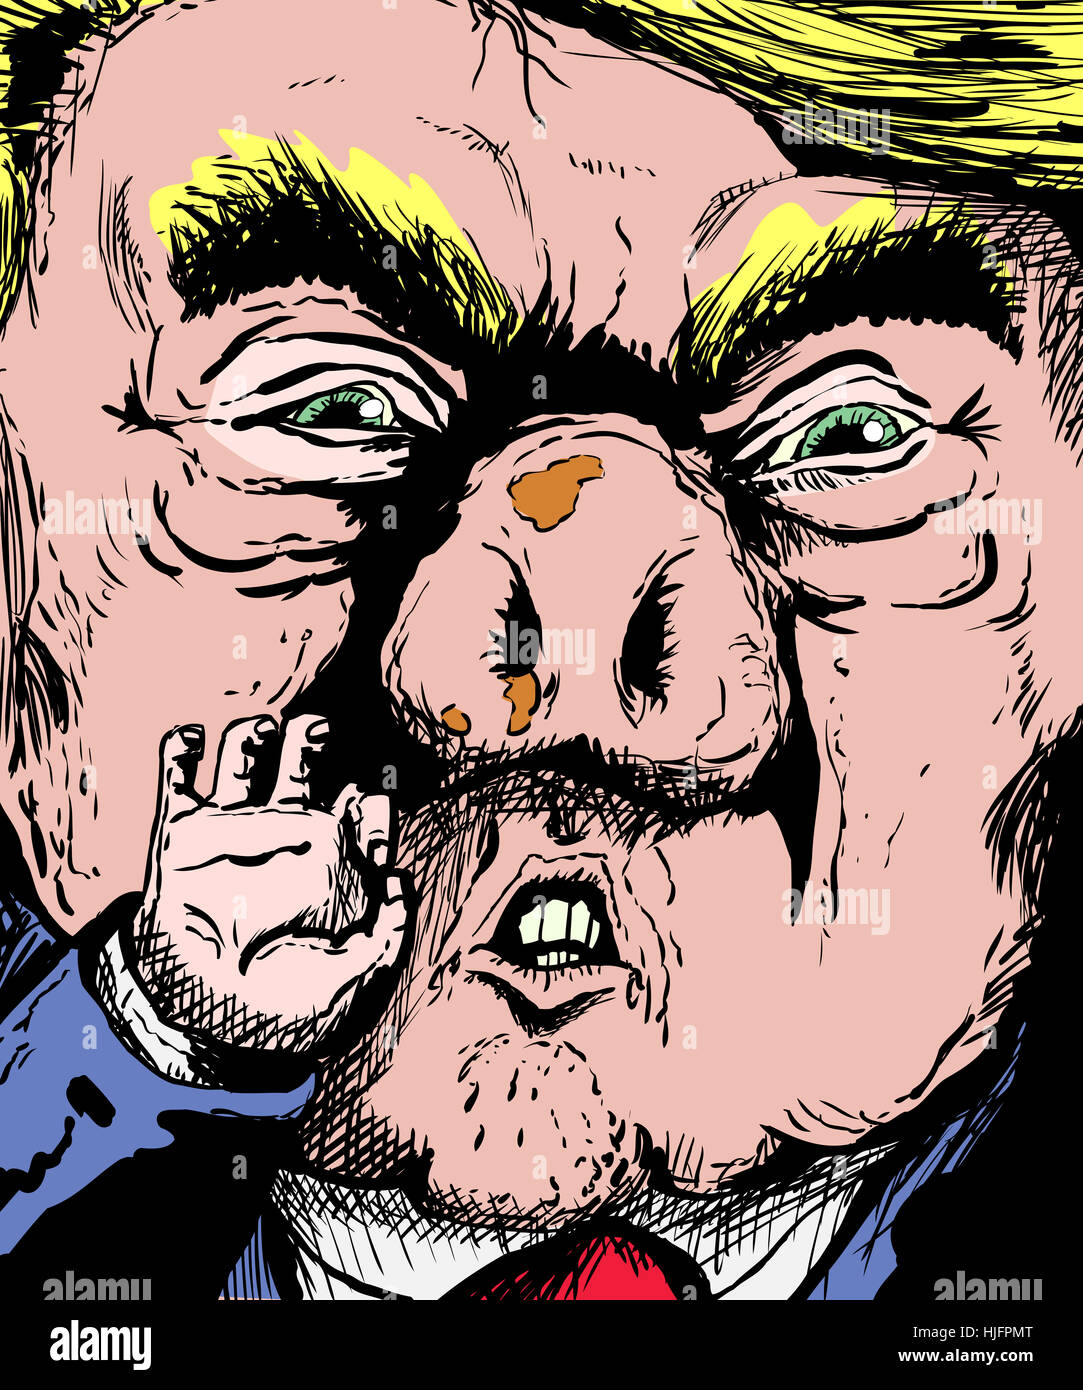 January 23, 2017. Caricature of Donald Trump with dirty hog shaped nose Stock Photo